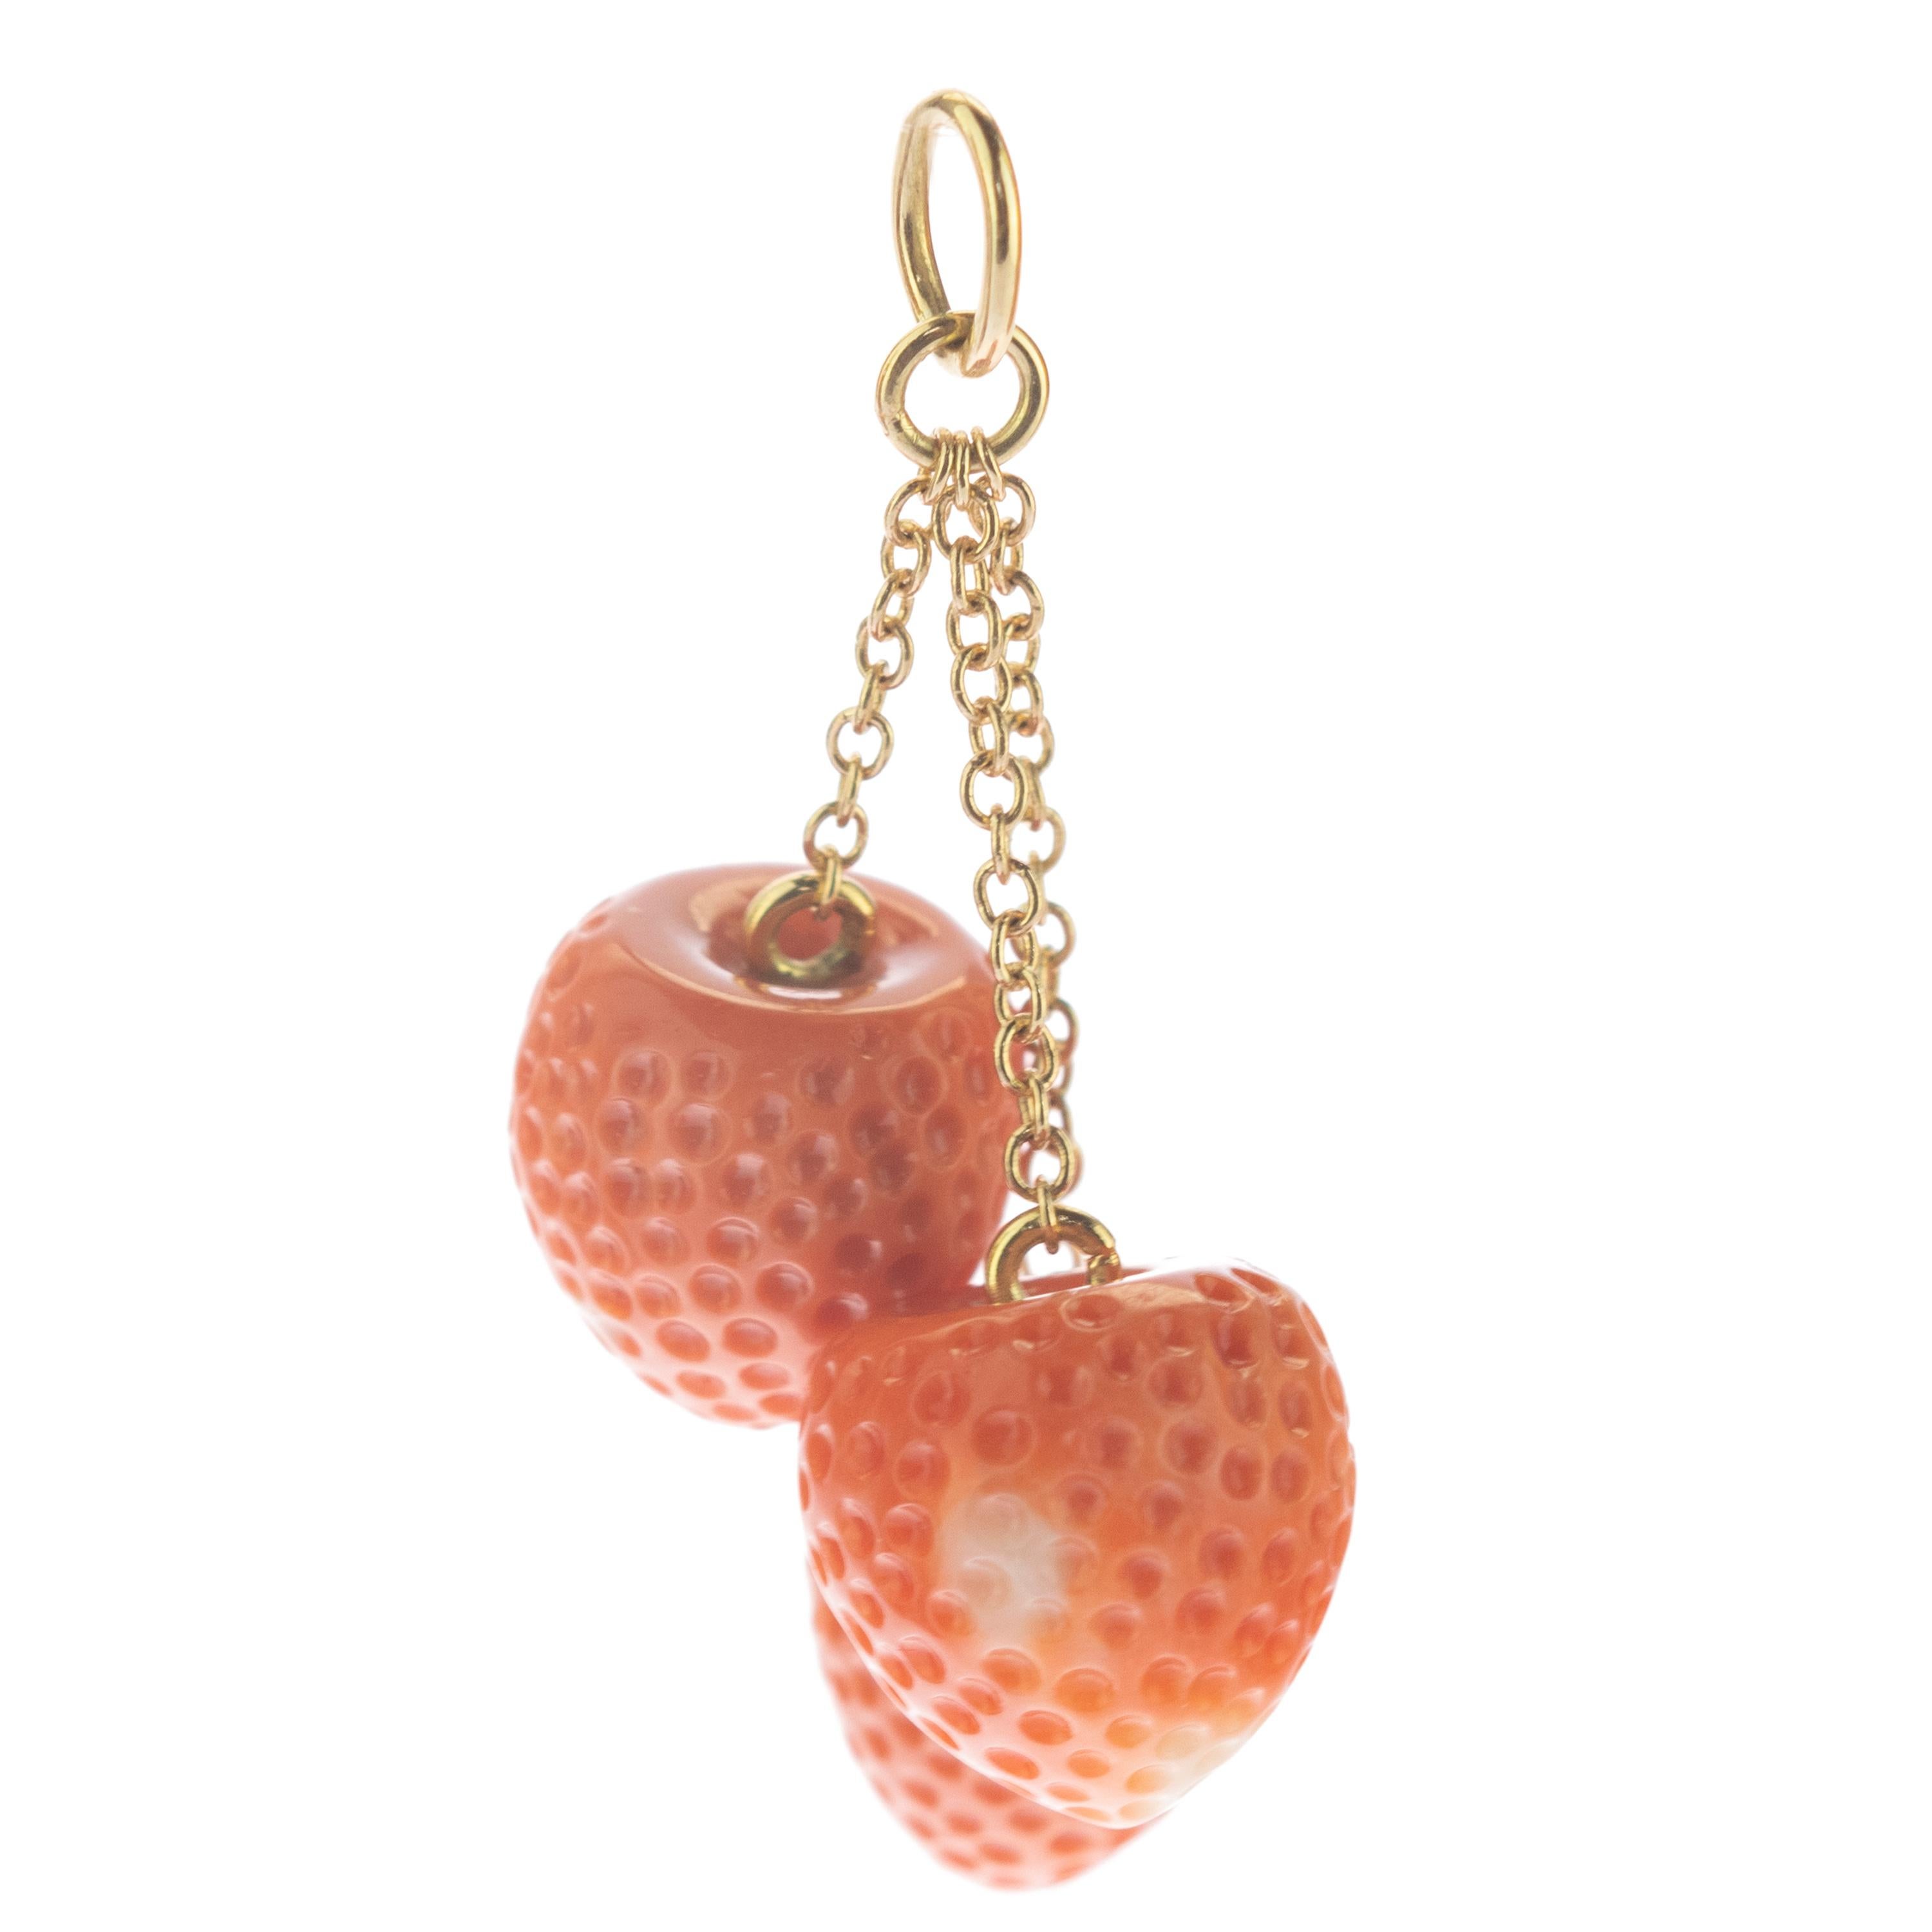 Astonishing and sweet mediterranean strawberry coral pendant . Natural coral carved gems holded by two 18 karat yellow gold chains that evoke the italian handmade traditional jewelry work Drop and dangle pendant with a subtle movement for a perfect